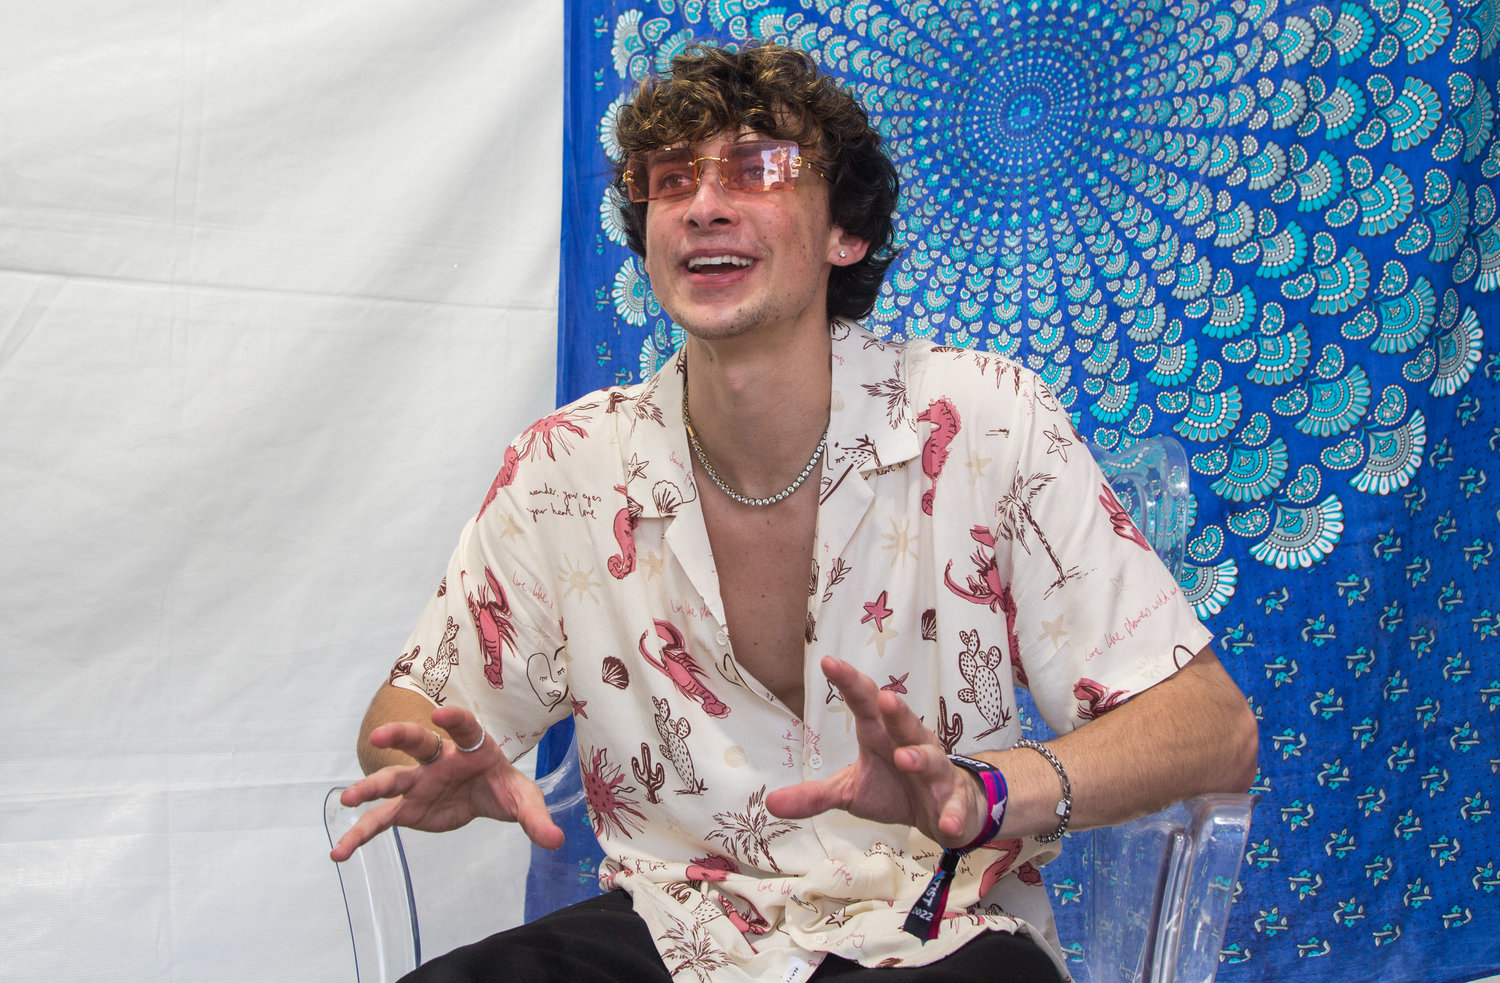 Zach Hood, a 2019 graduate of Daphne High School, speaks to Gulf Coast Media at Hangout Music Fest 2022 in Gulf Shores on Friday, May 20.